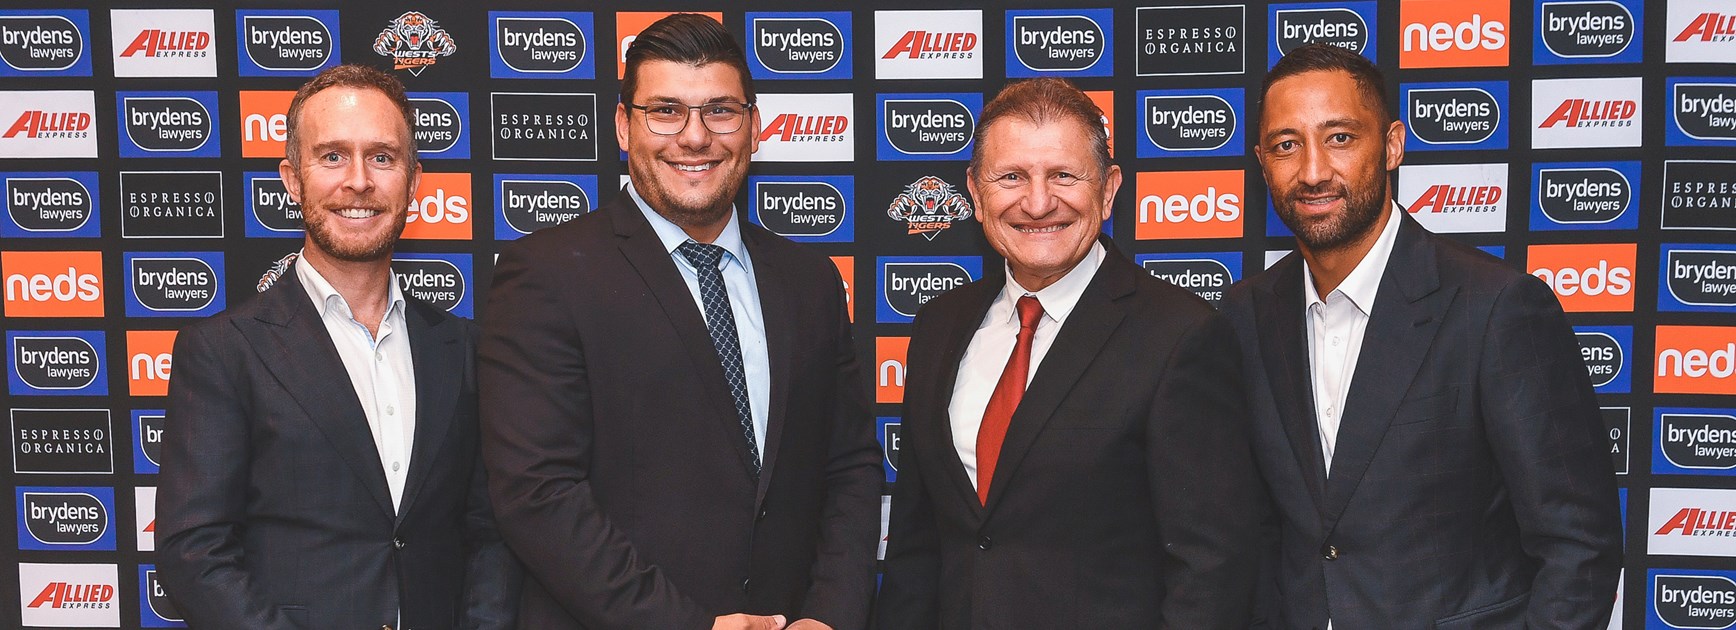 Waterview joins Wests Tigers as Platinum Venue partner